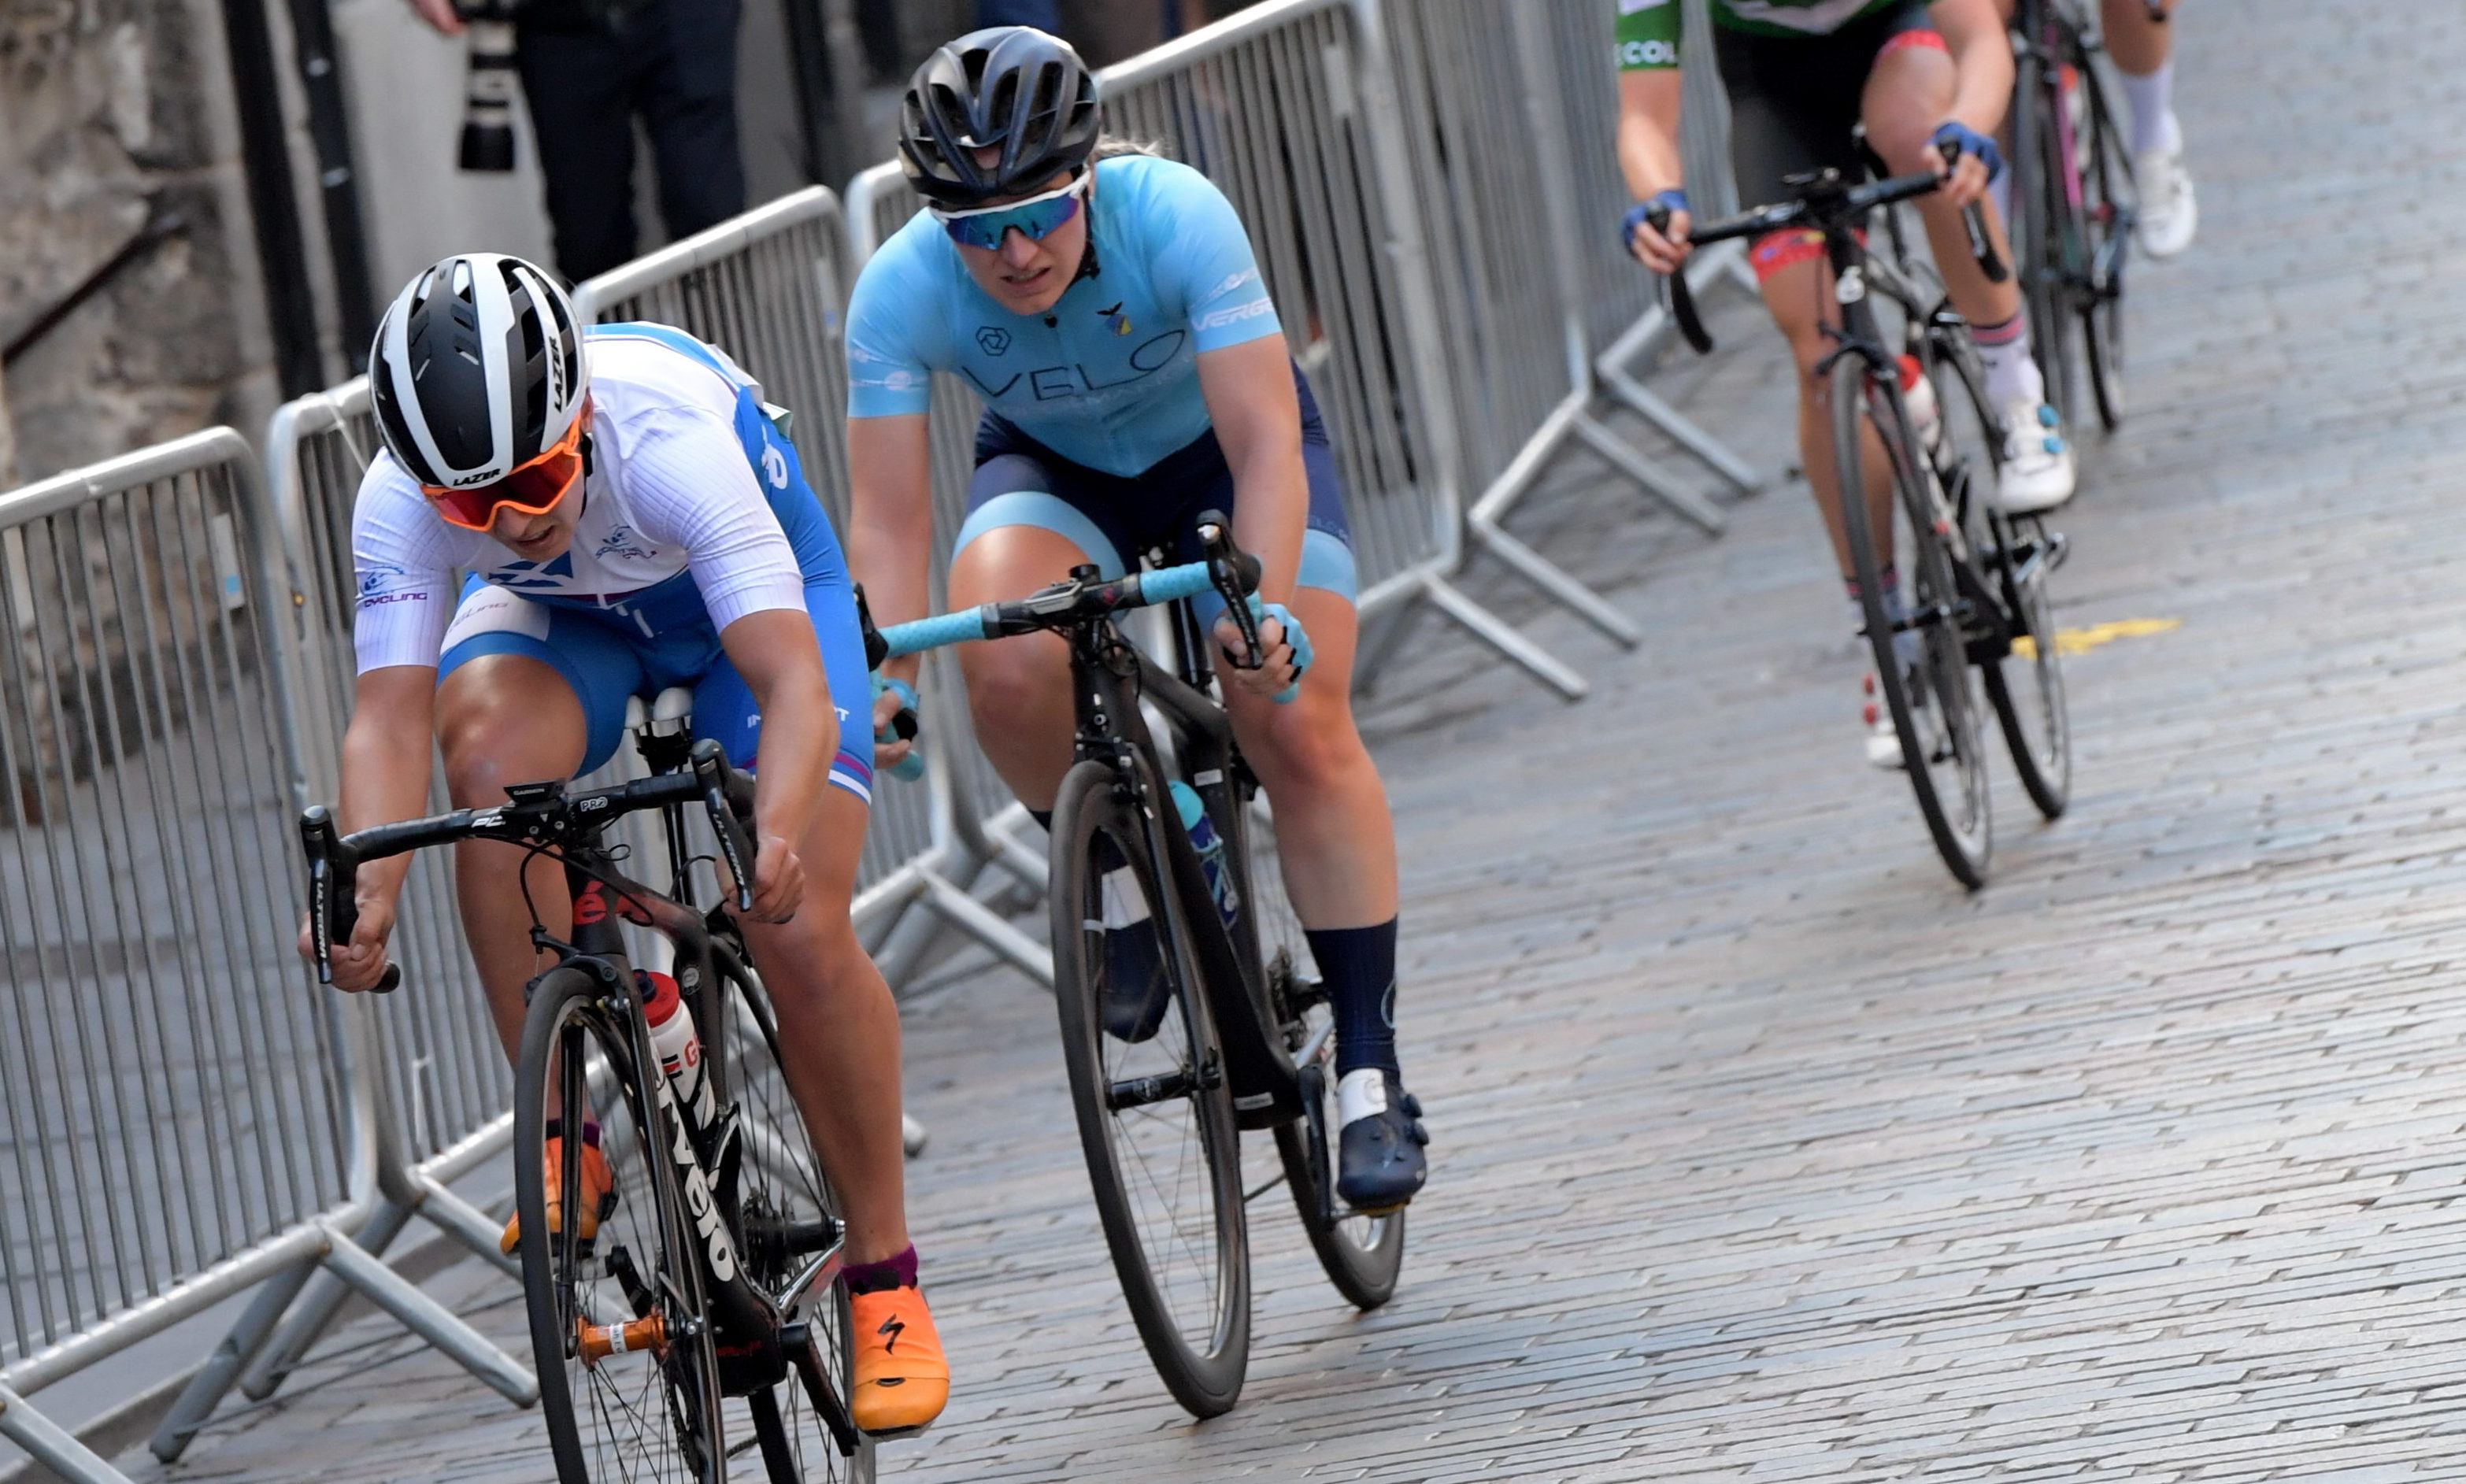 Neah Evans, front left, competing in Aberdeen during last year's Tour Series event.